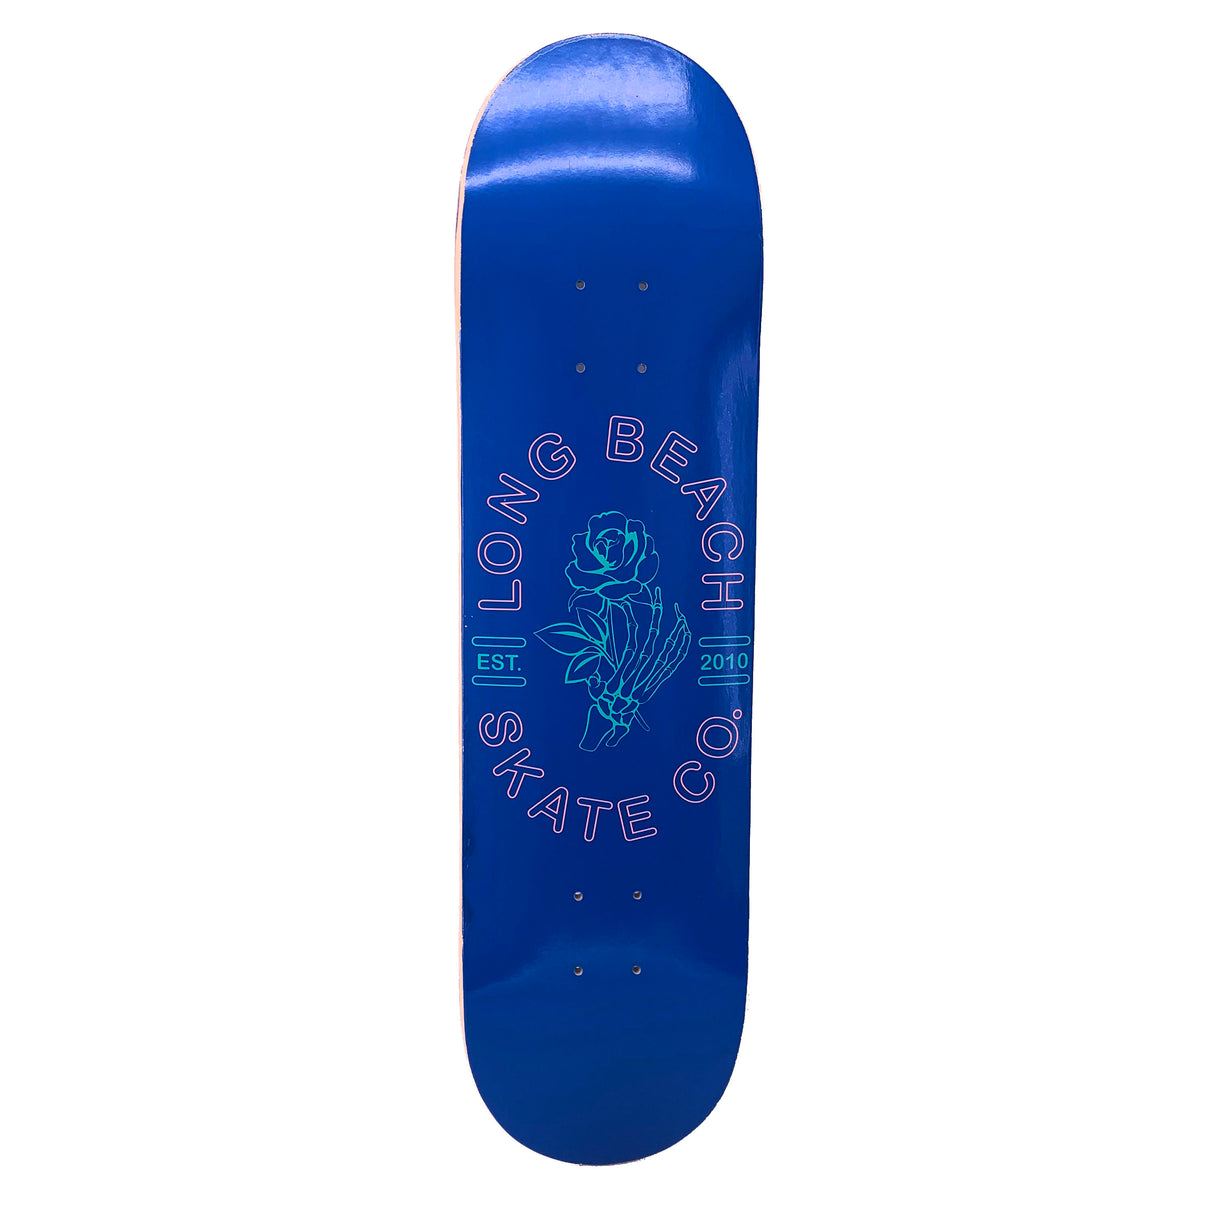 Long Beach Skate Co. "Rose In Hand" Navy Turquoise Pink 7.75" Skateboard Deck